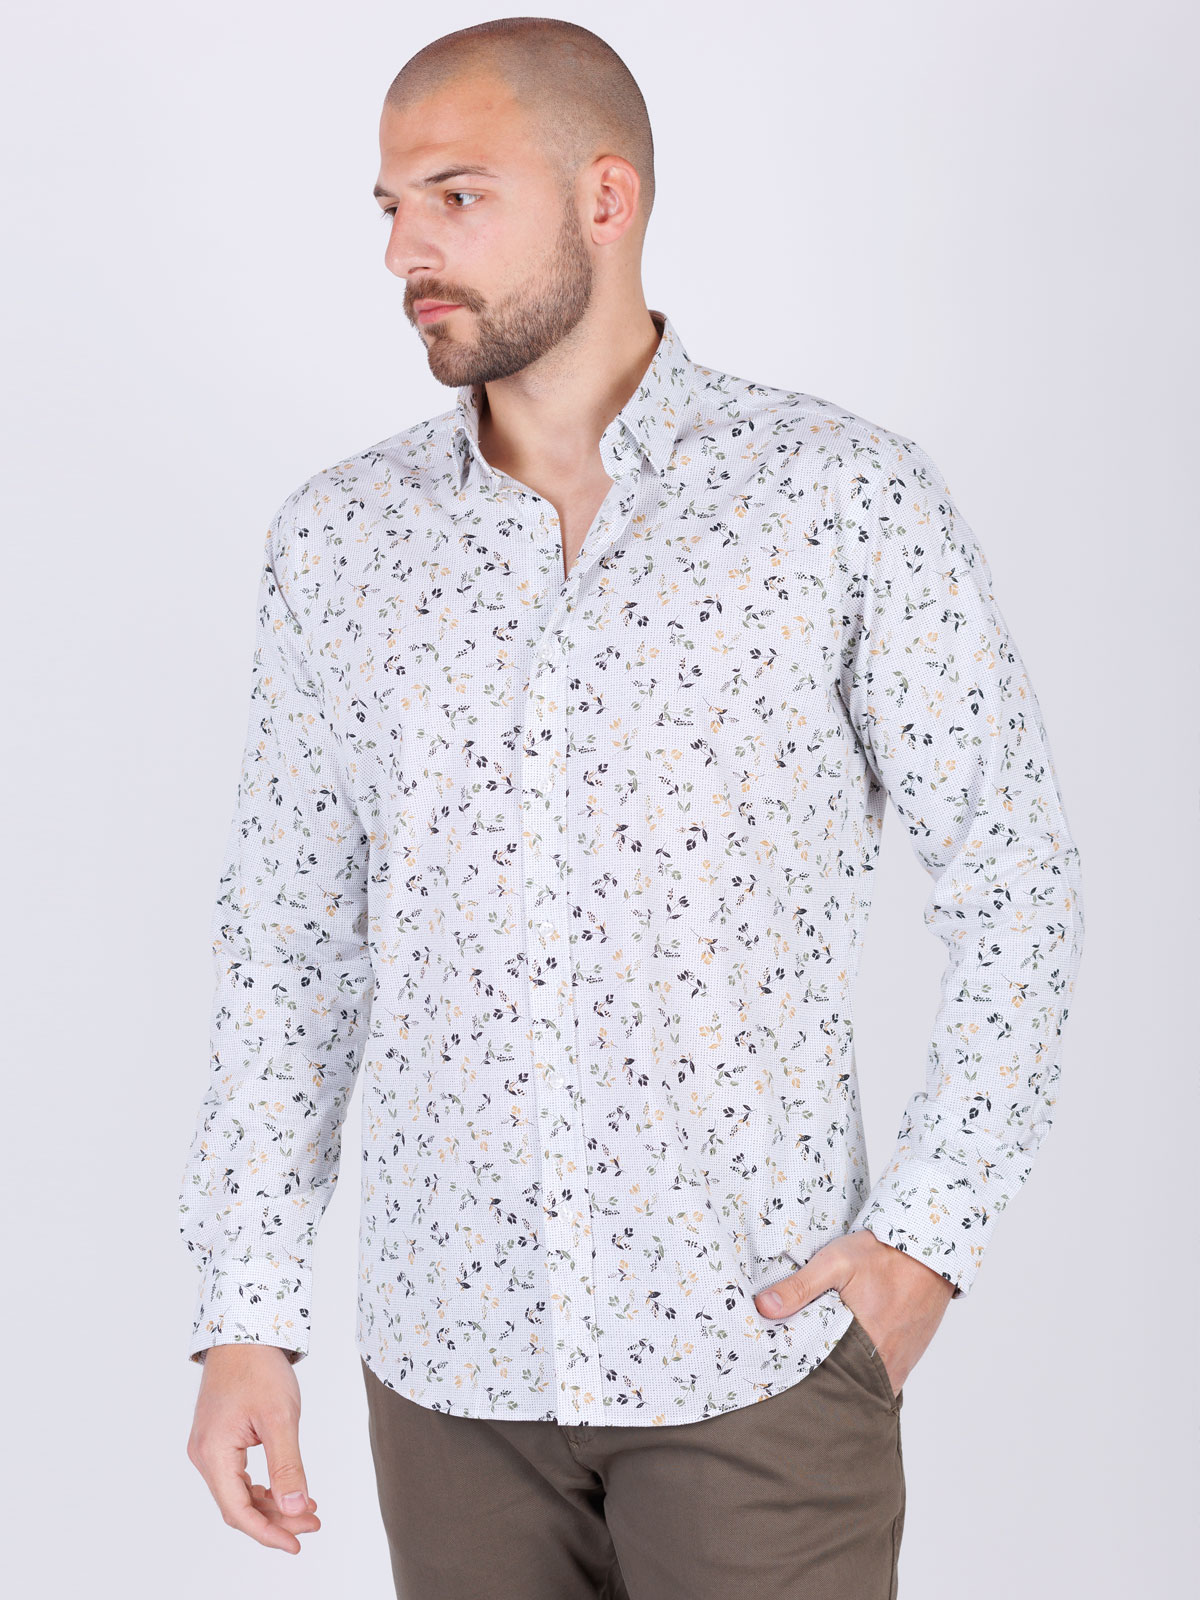 Mens shirt in white with printed leaves - 21547 € 43.87 img4